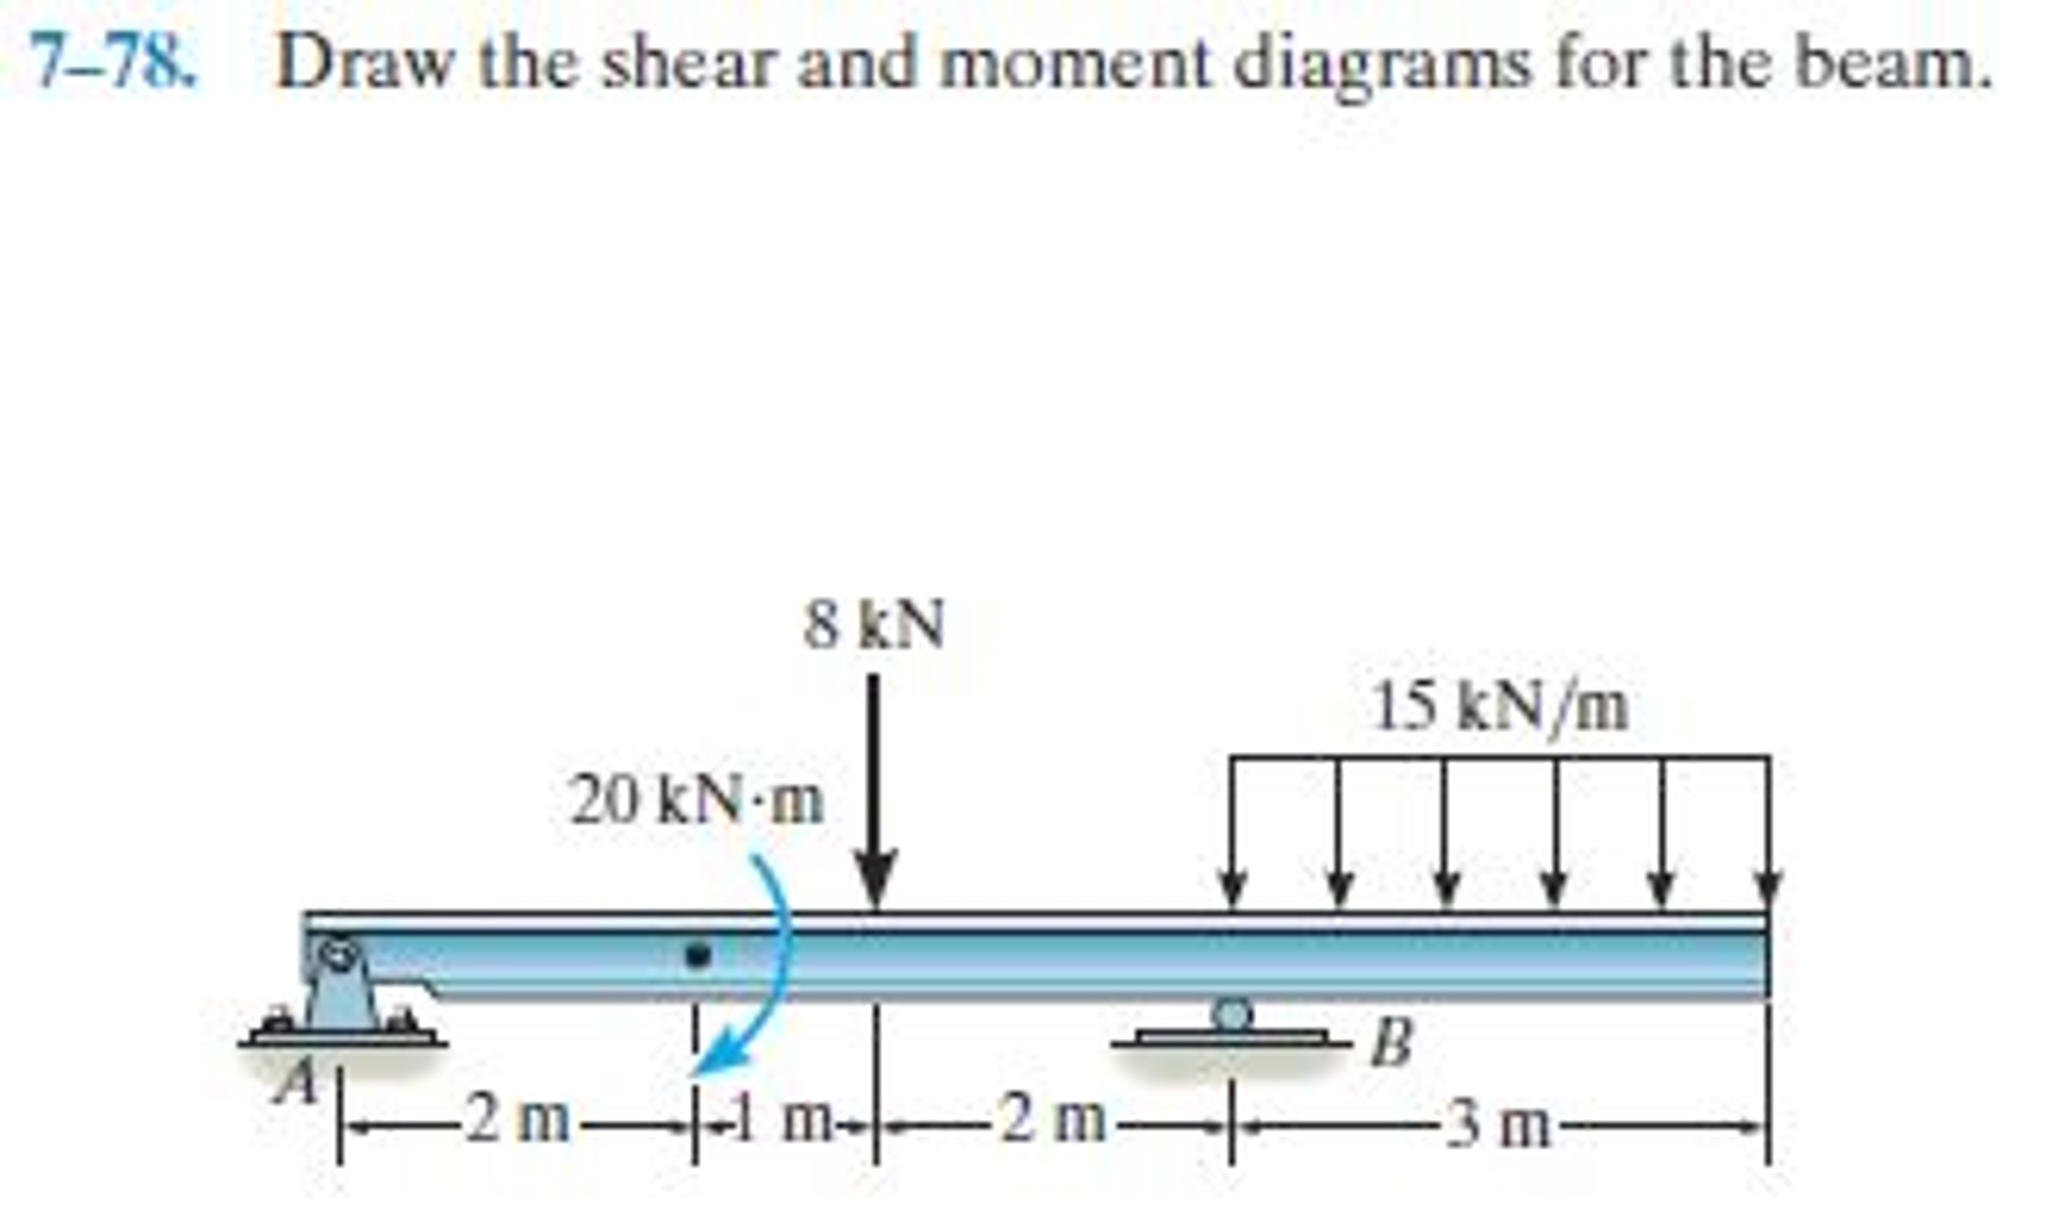 Draw the shear and moment diagrams for the beam.